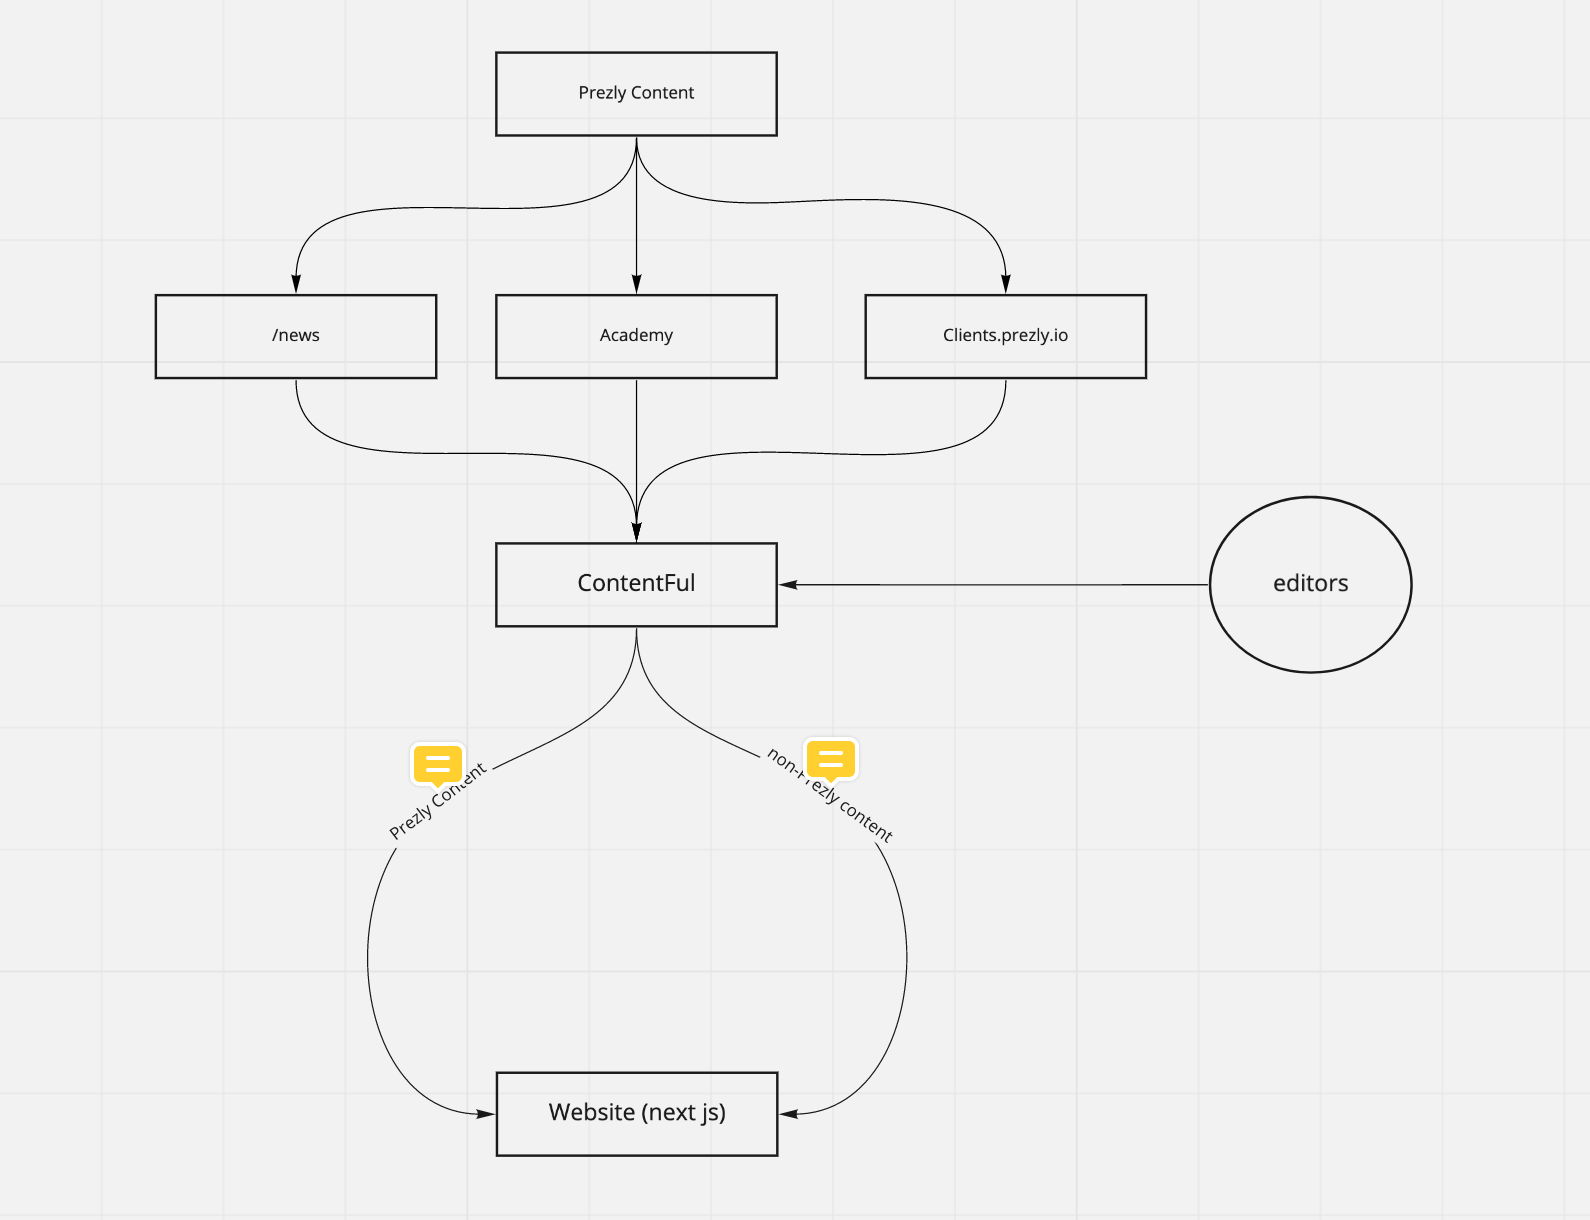 Outdated flow diagram of syncing code from Prezly to contentful